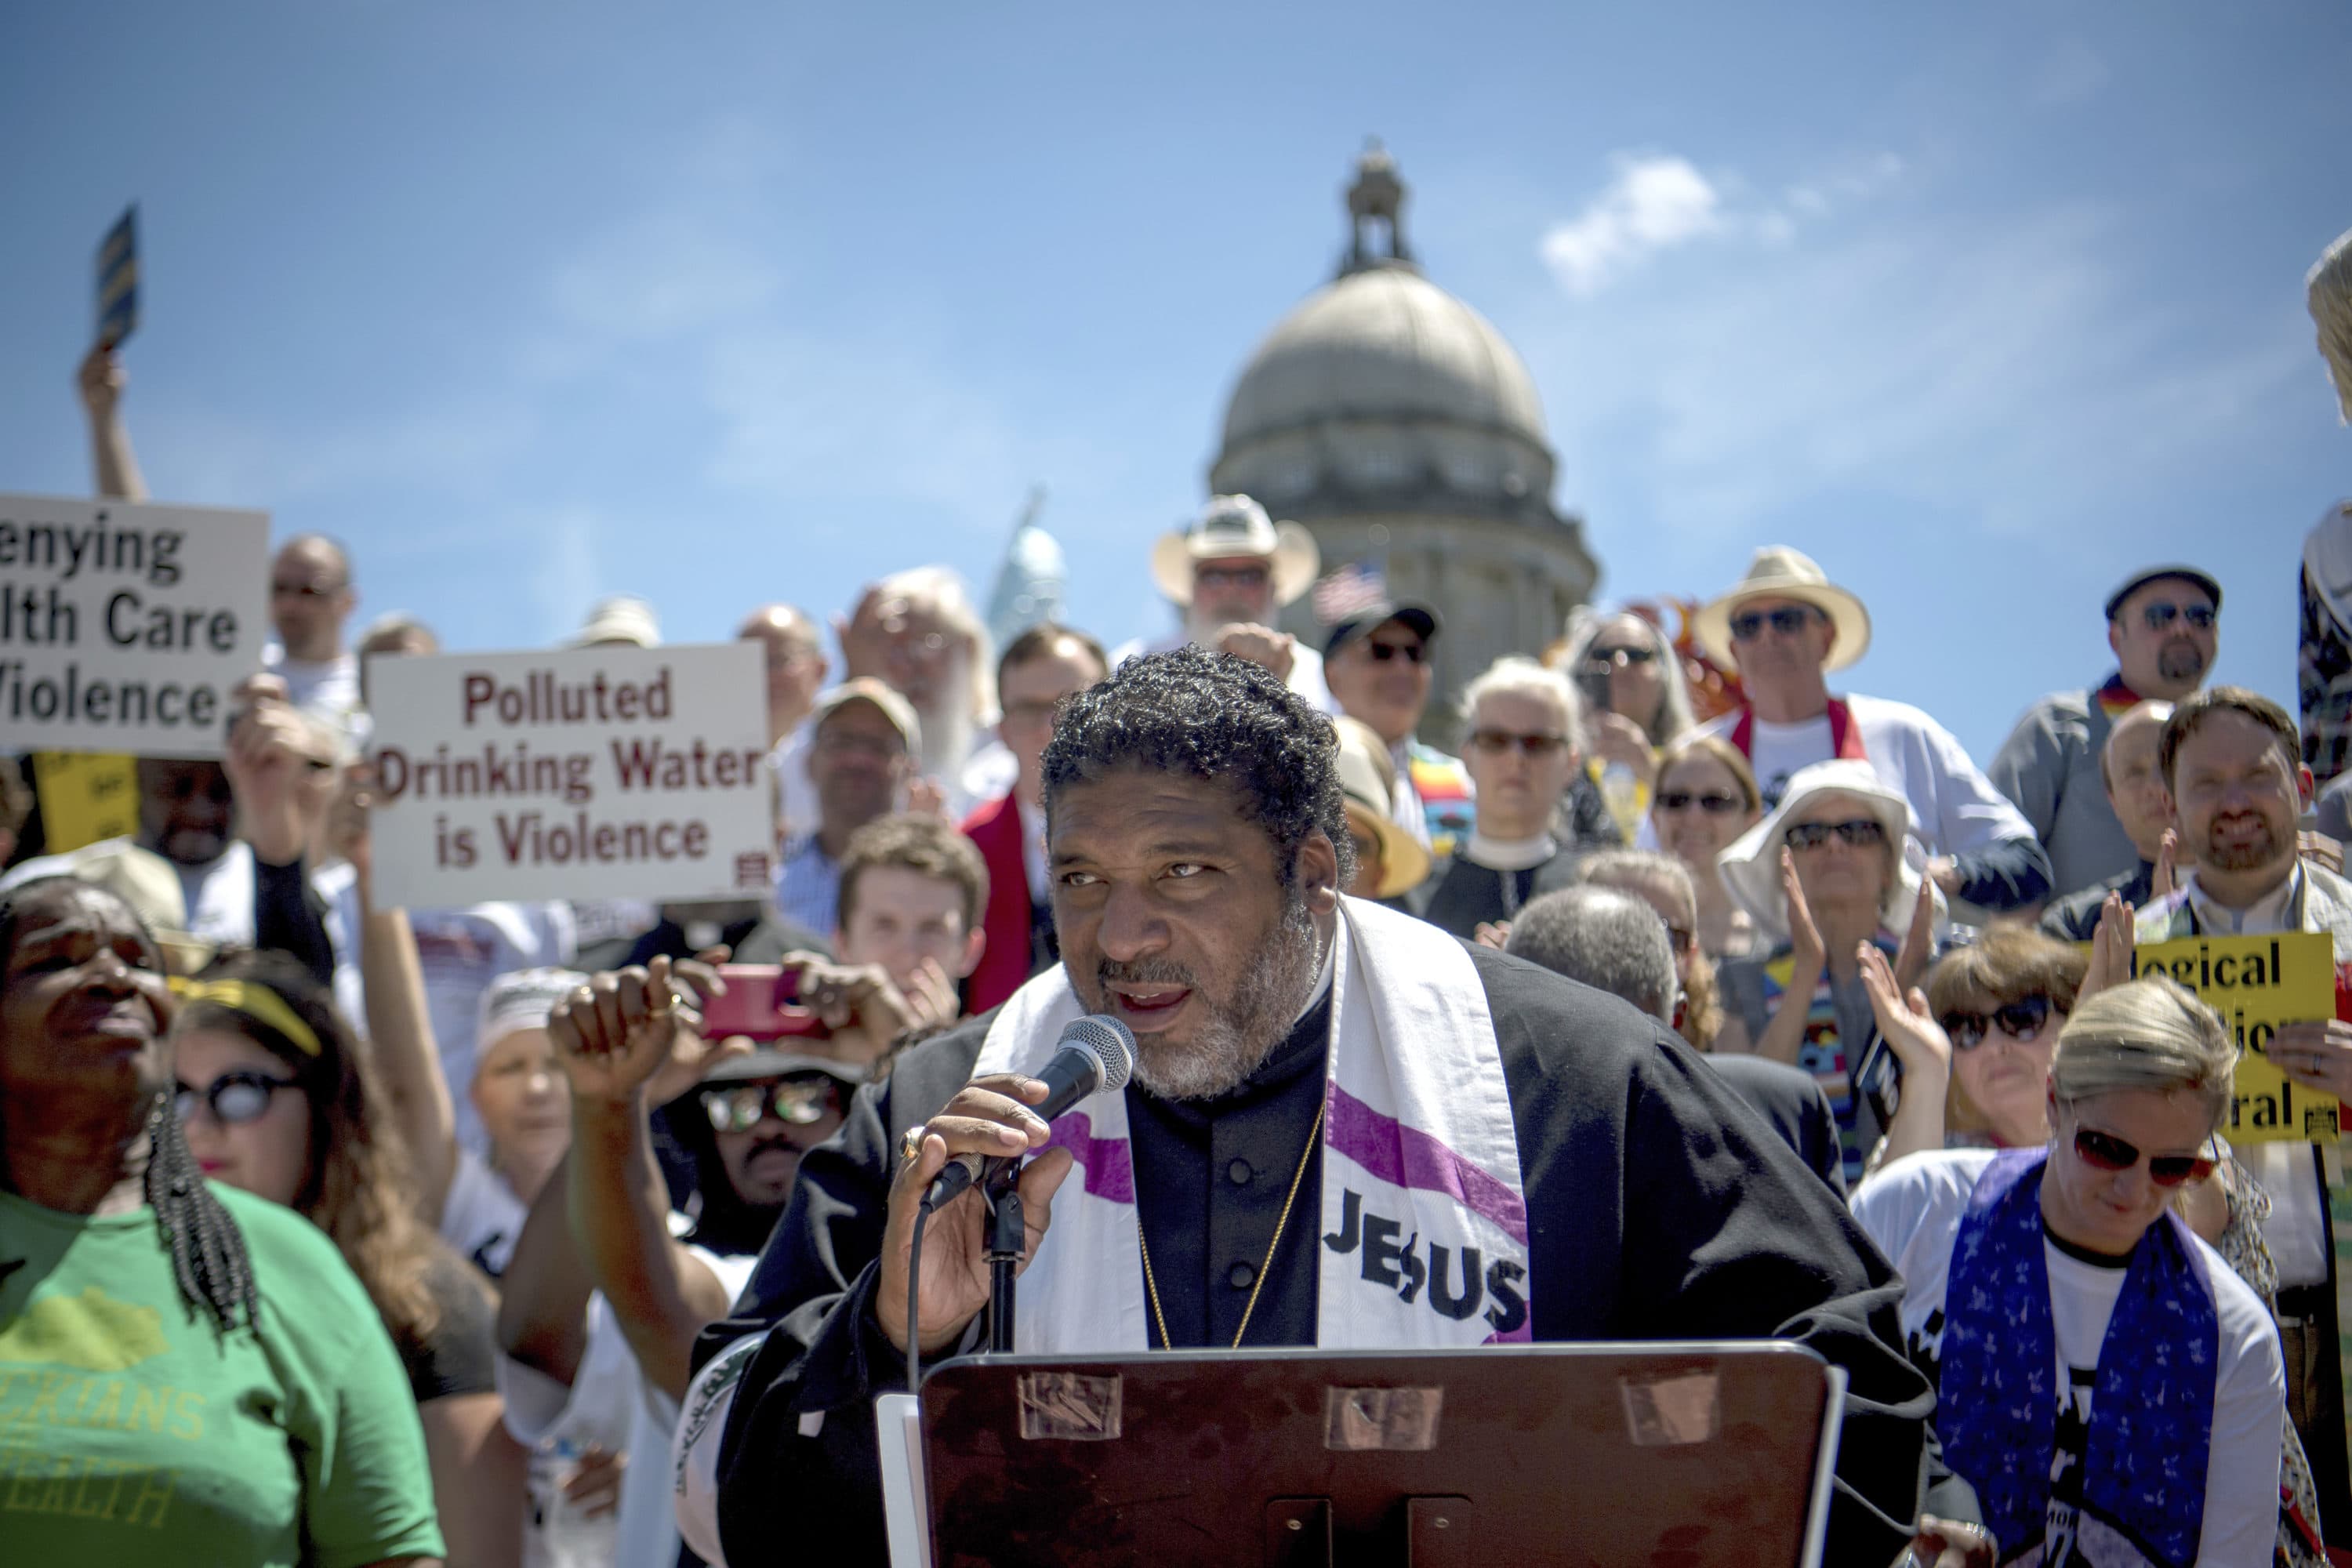 Reverend William J. Barber speaks to protesters gathered during a protest organized by Kentucky Poor People's Campaign in Frankfort, Ky., in 2018. (Bryan Woolston/AP)